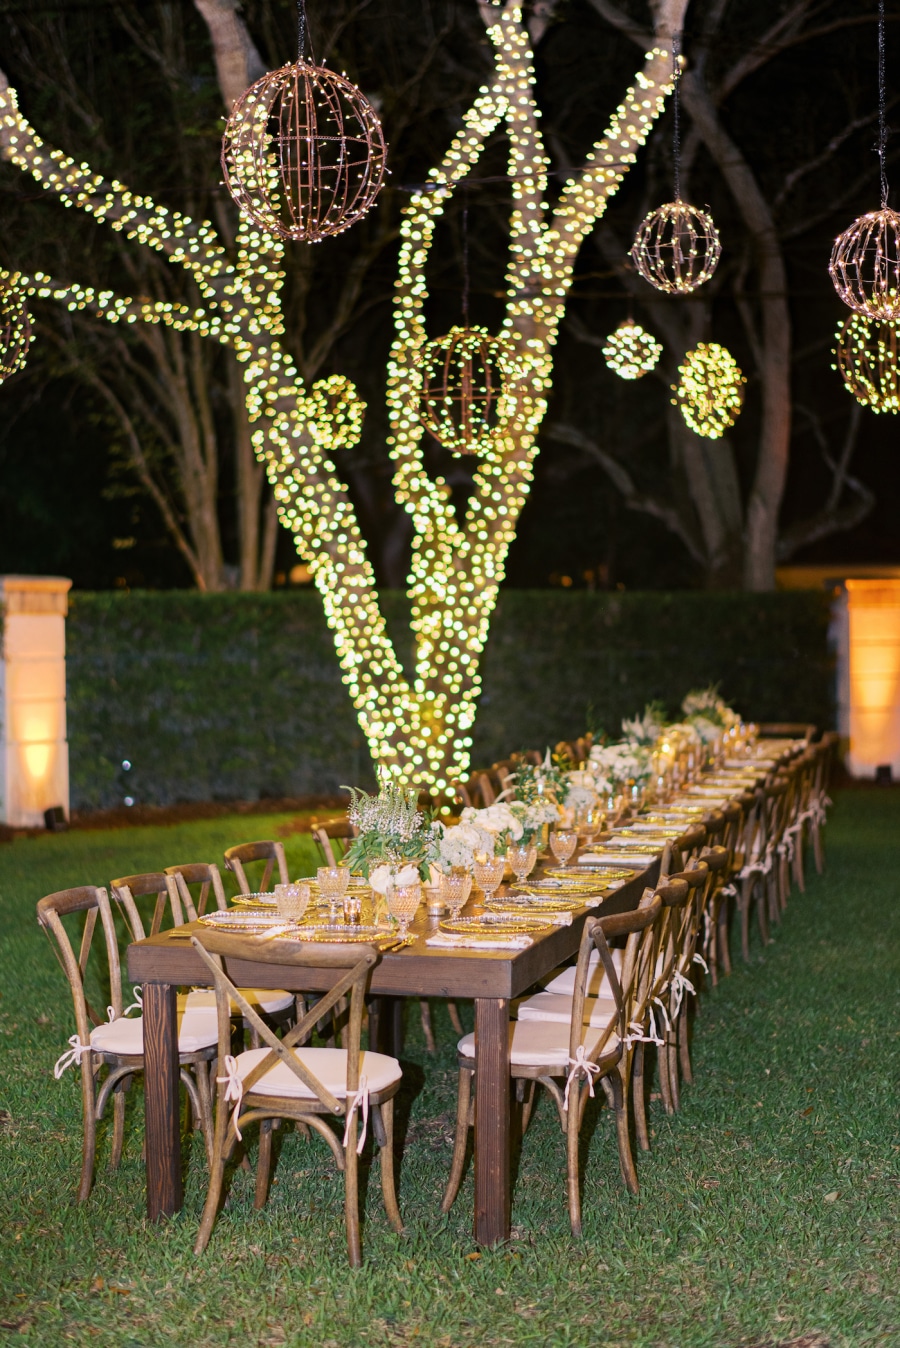 Our 35th Birthday Celebration: A Night under the lights - Fashionable Hostess